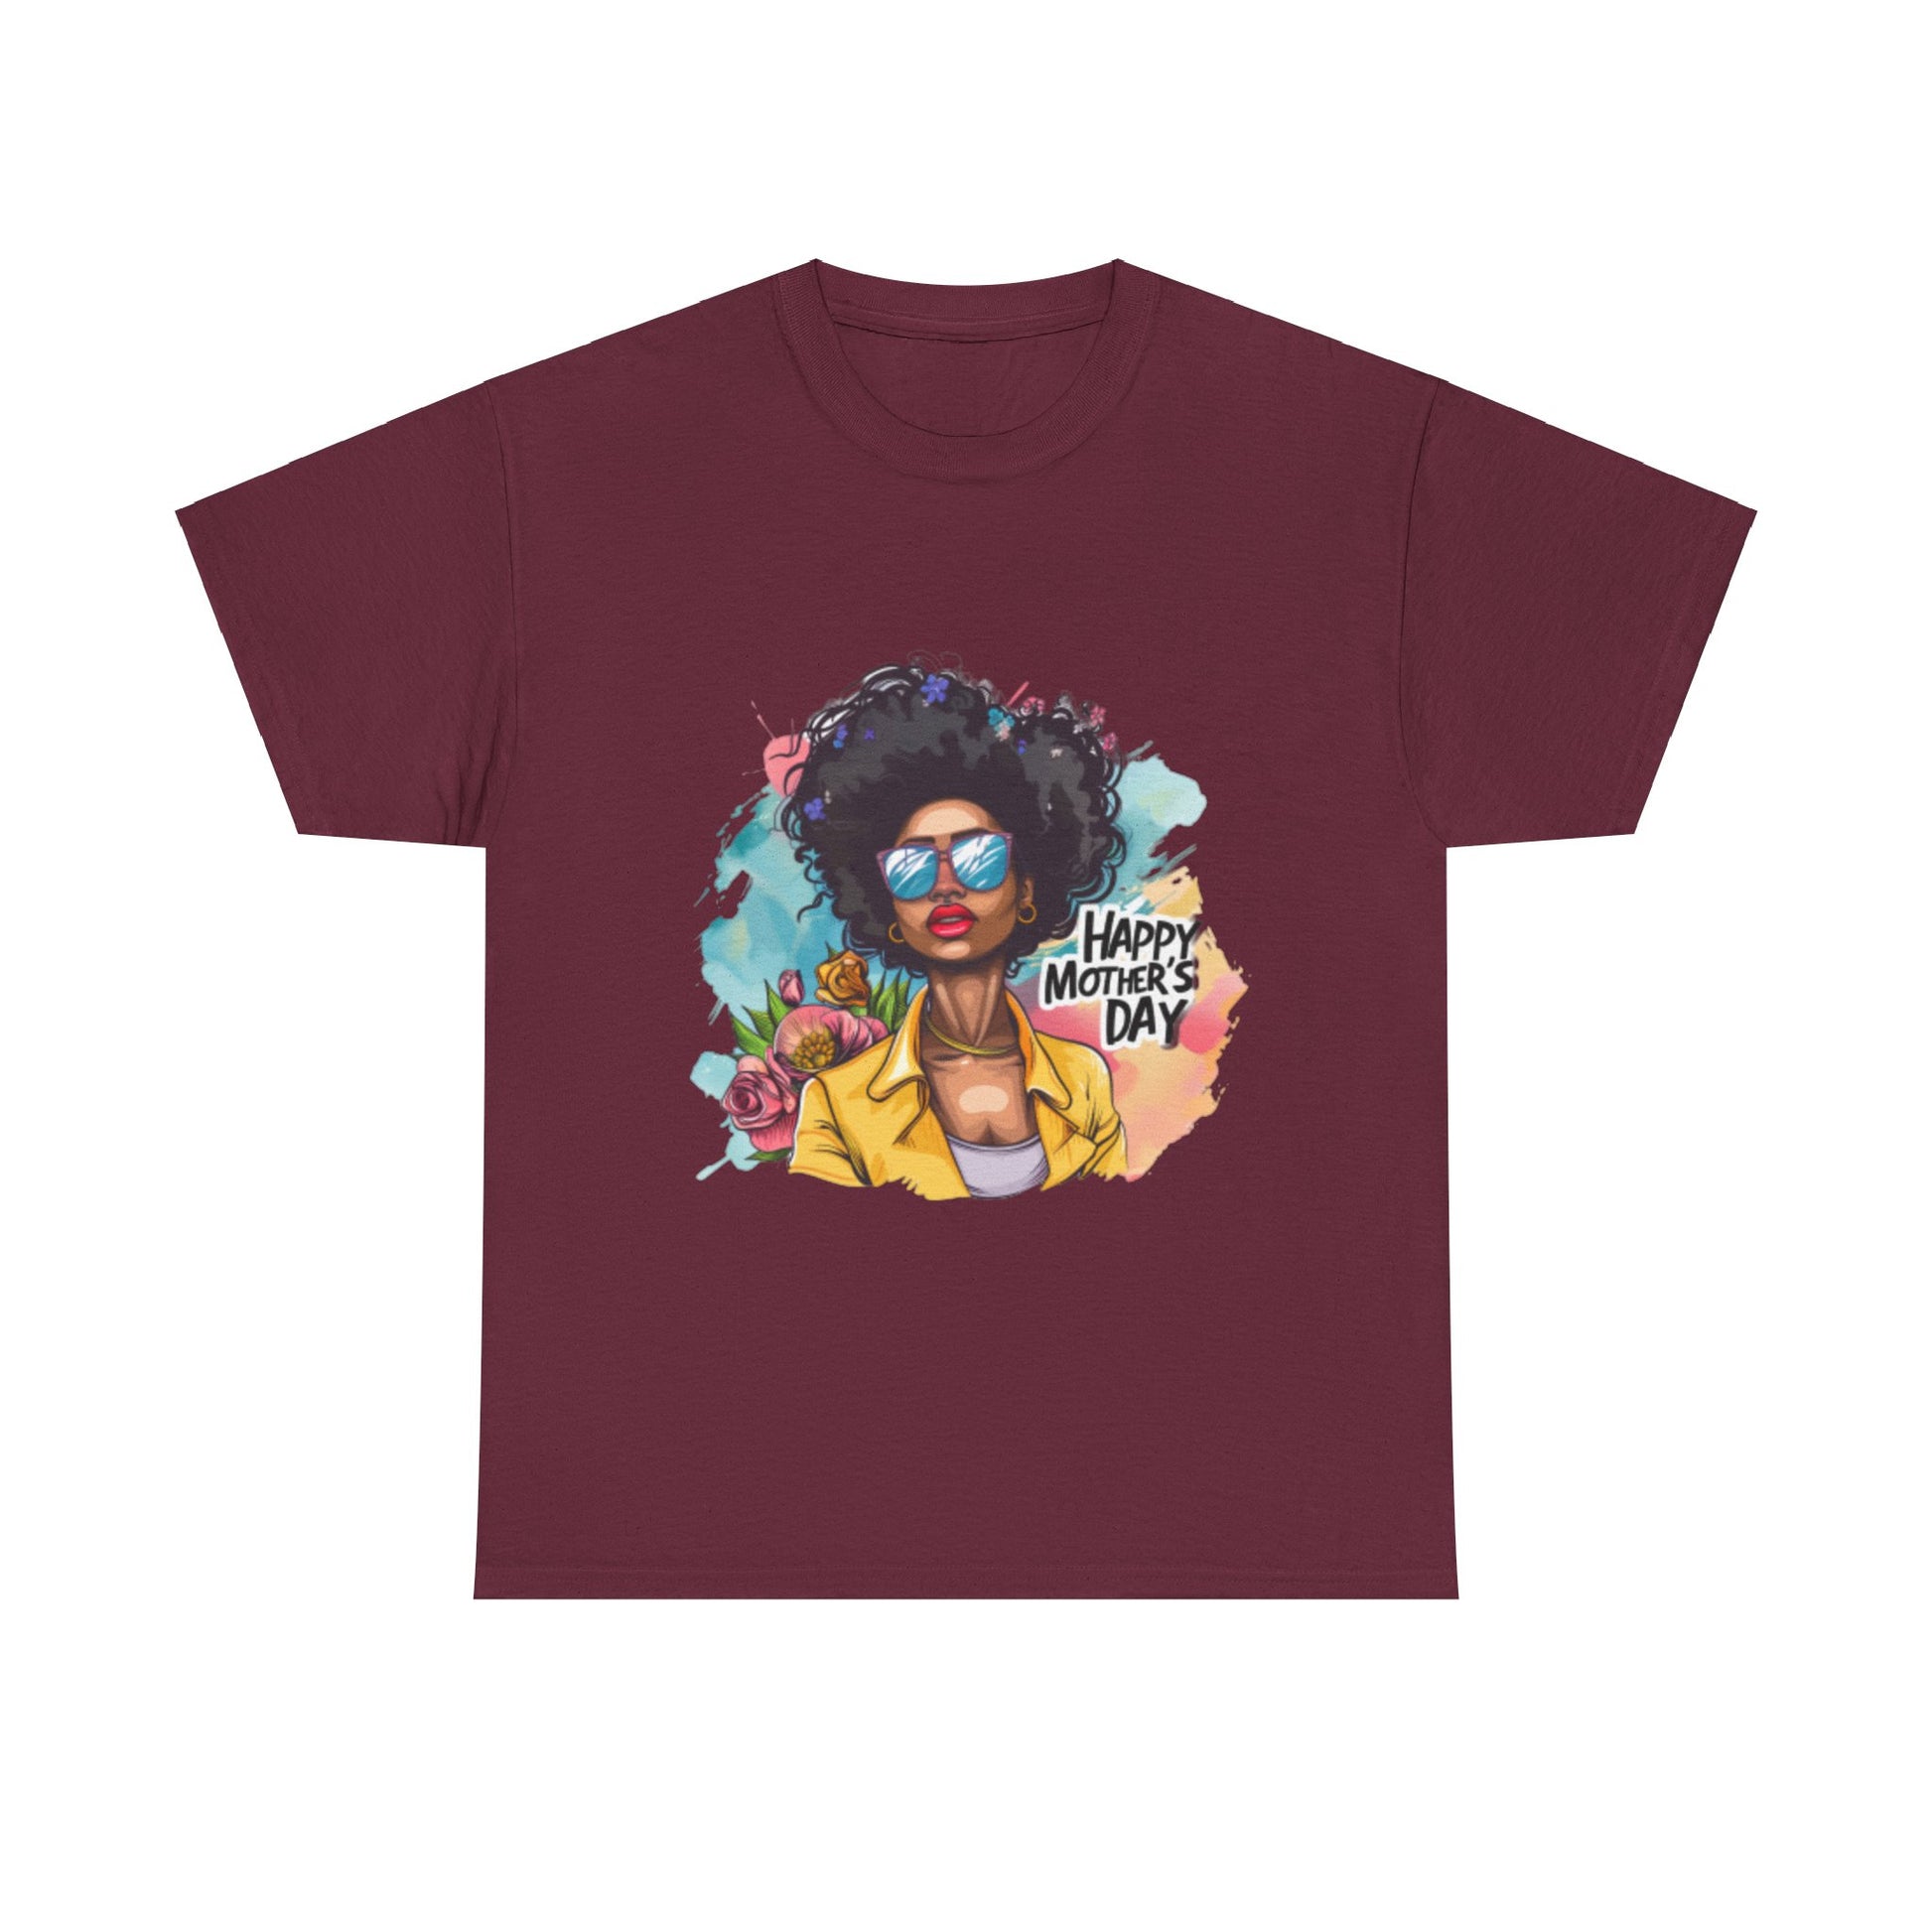 Happy Mother's Day African American Mom Graphic Unisex Heavy Cotton Tee Cotton Funny Humorous Graphic Soft Premium Unisex Men Women Maroon T-shirt Birthday Gift-5